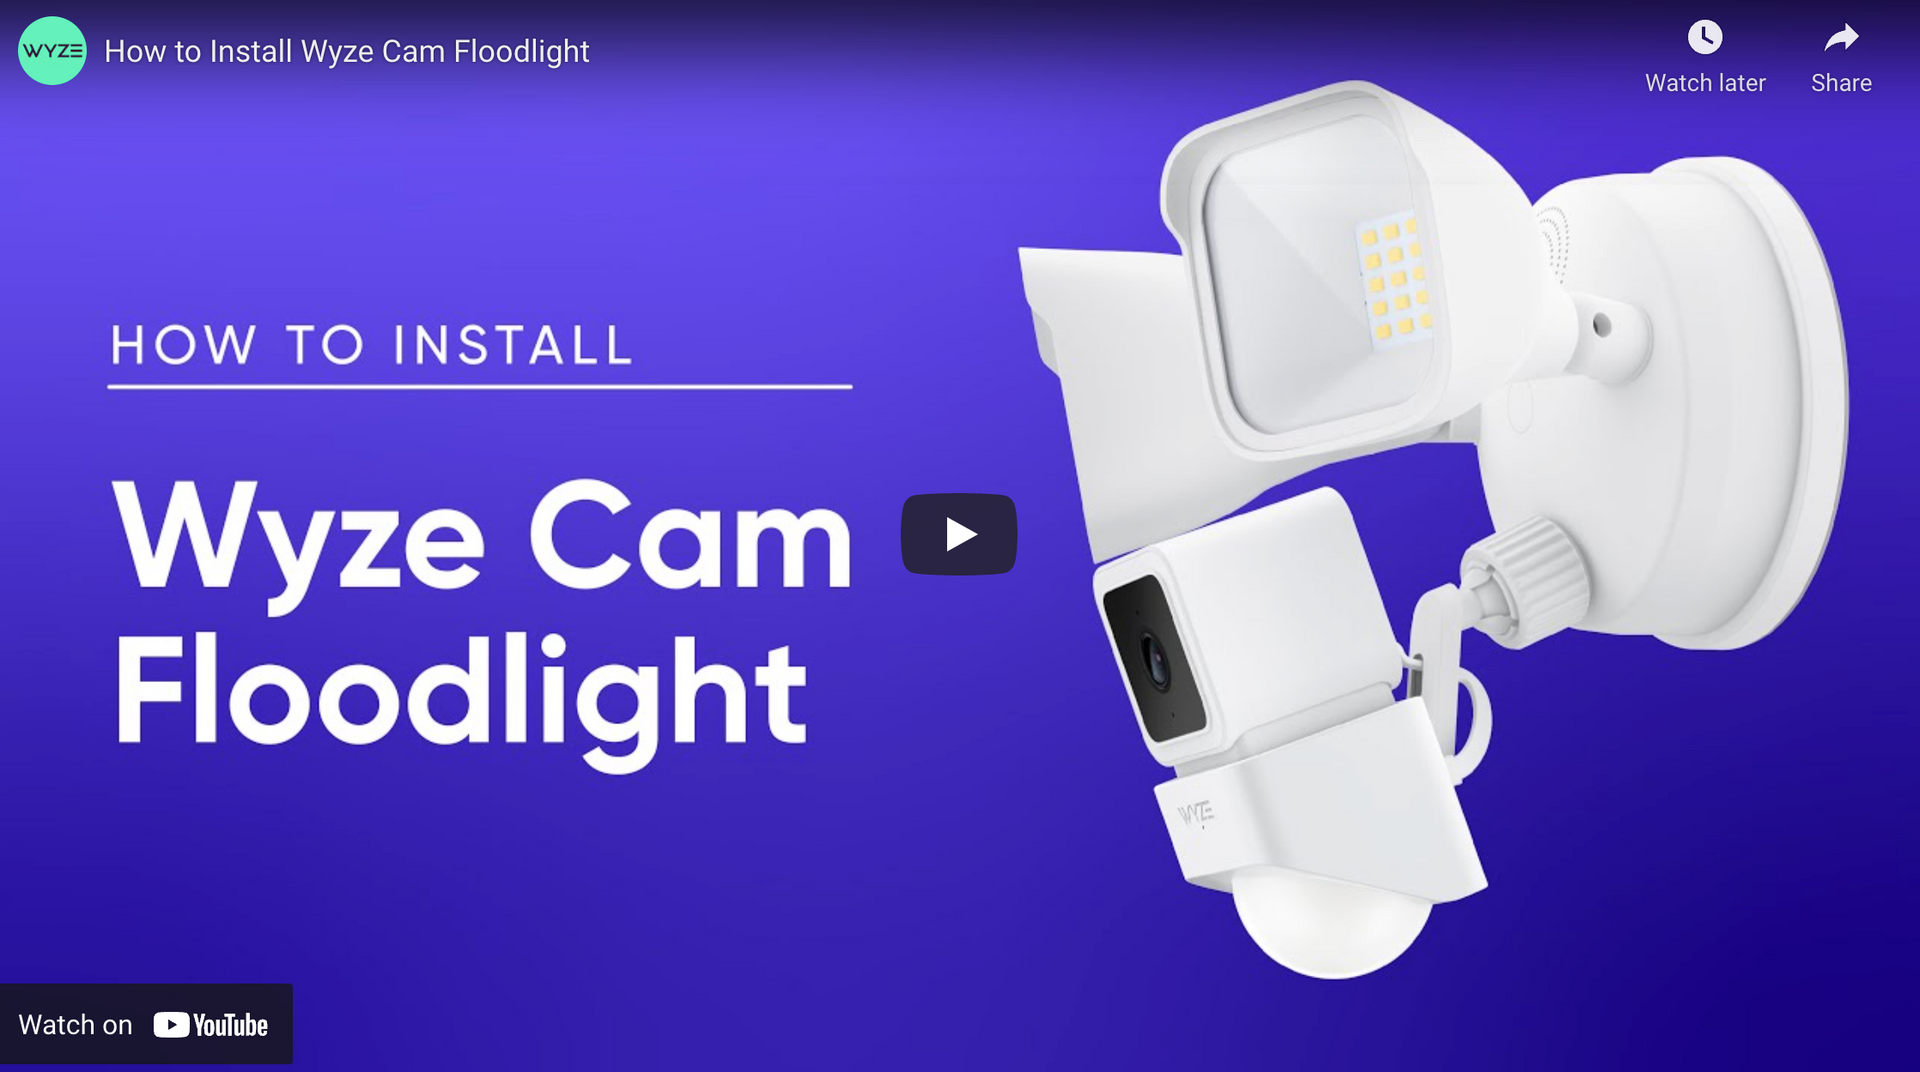 Load video: How to install Wyze Cam Floodlight instructions.